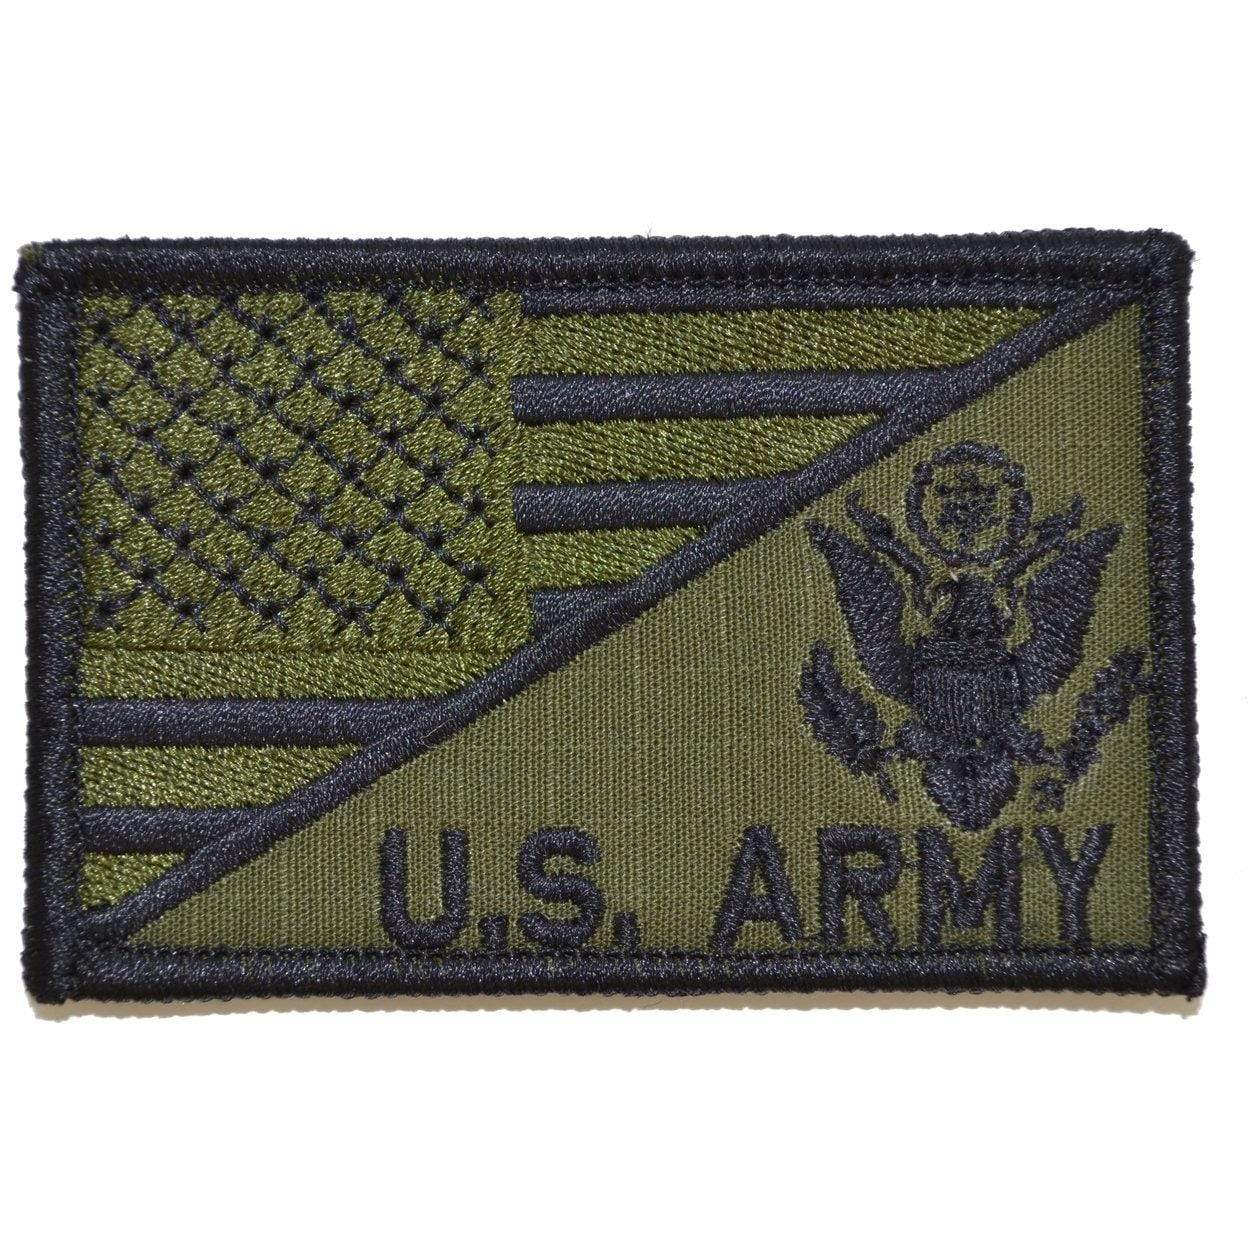 US Army with Text USA Flag - 2.25x3.5 Patch, Green